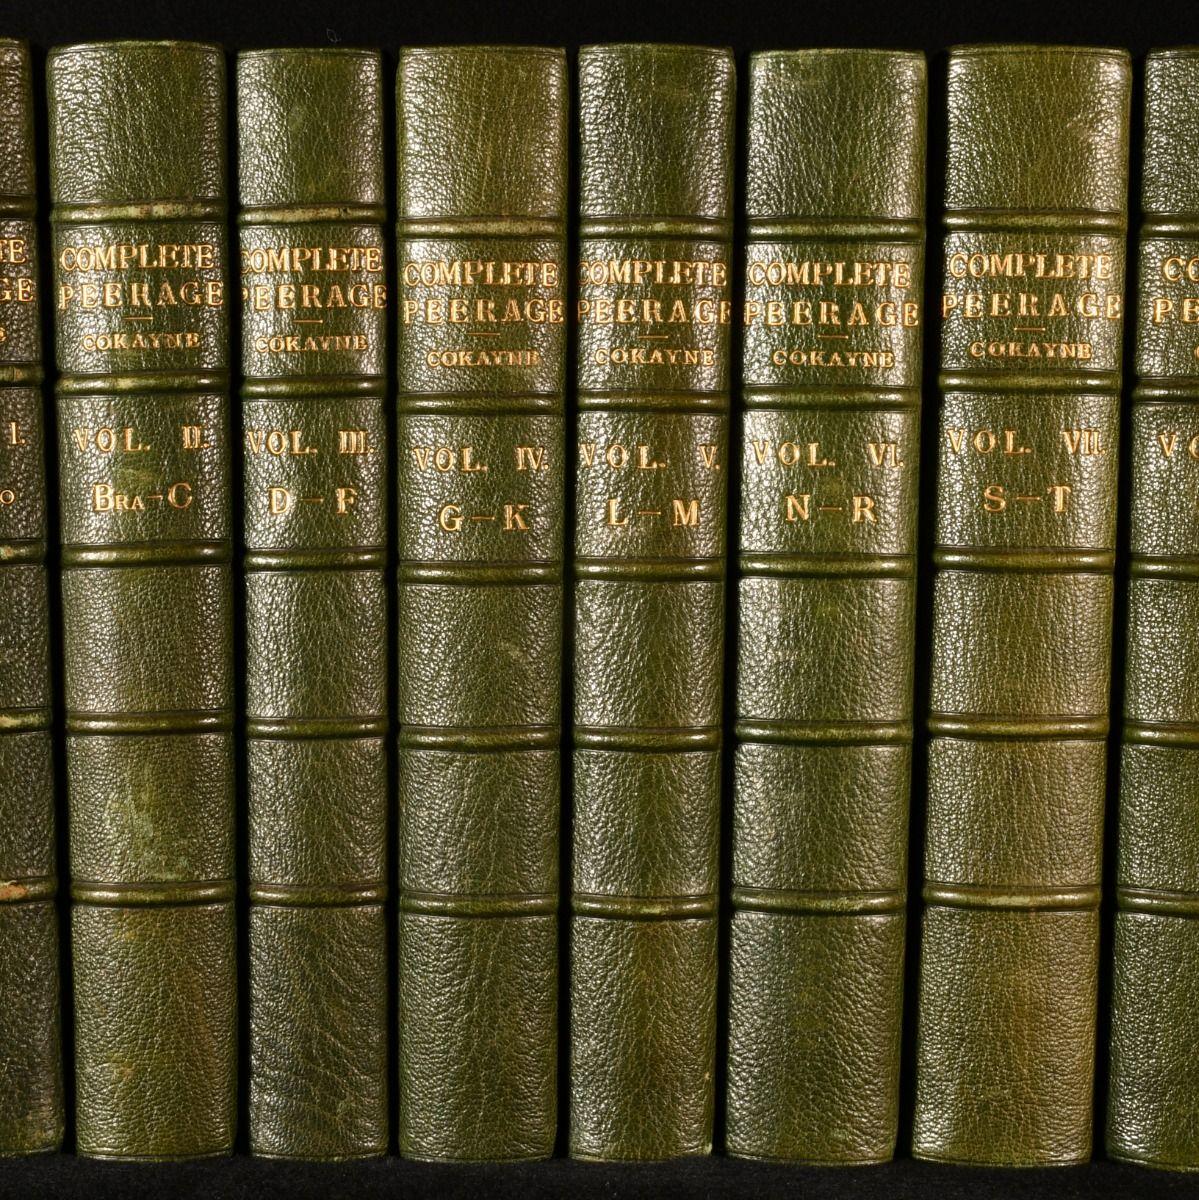 A beautifully bound first edition set of this important authorativie reference work on the peerage of Britain, by George Edward Cokayne.

The first edition of this work.

Complete in eight volumes.

In a fine half morocco binding by Morrell.

'The